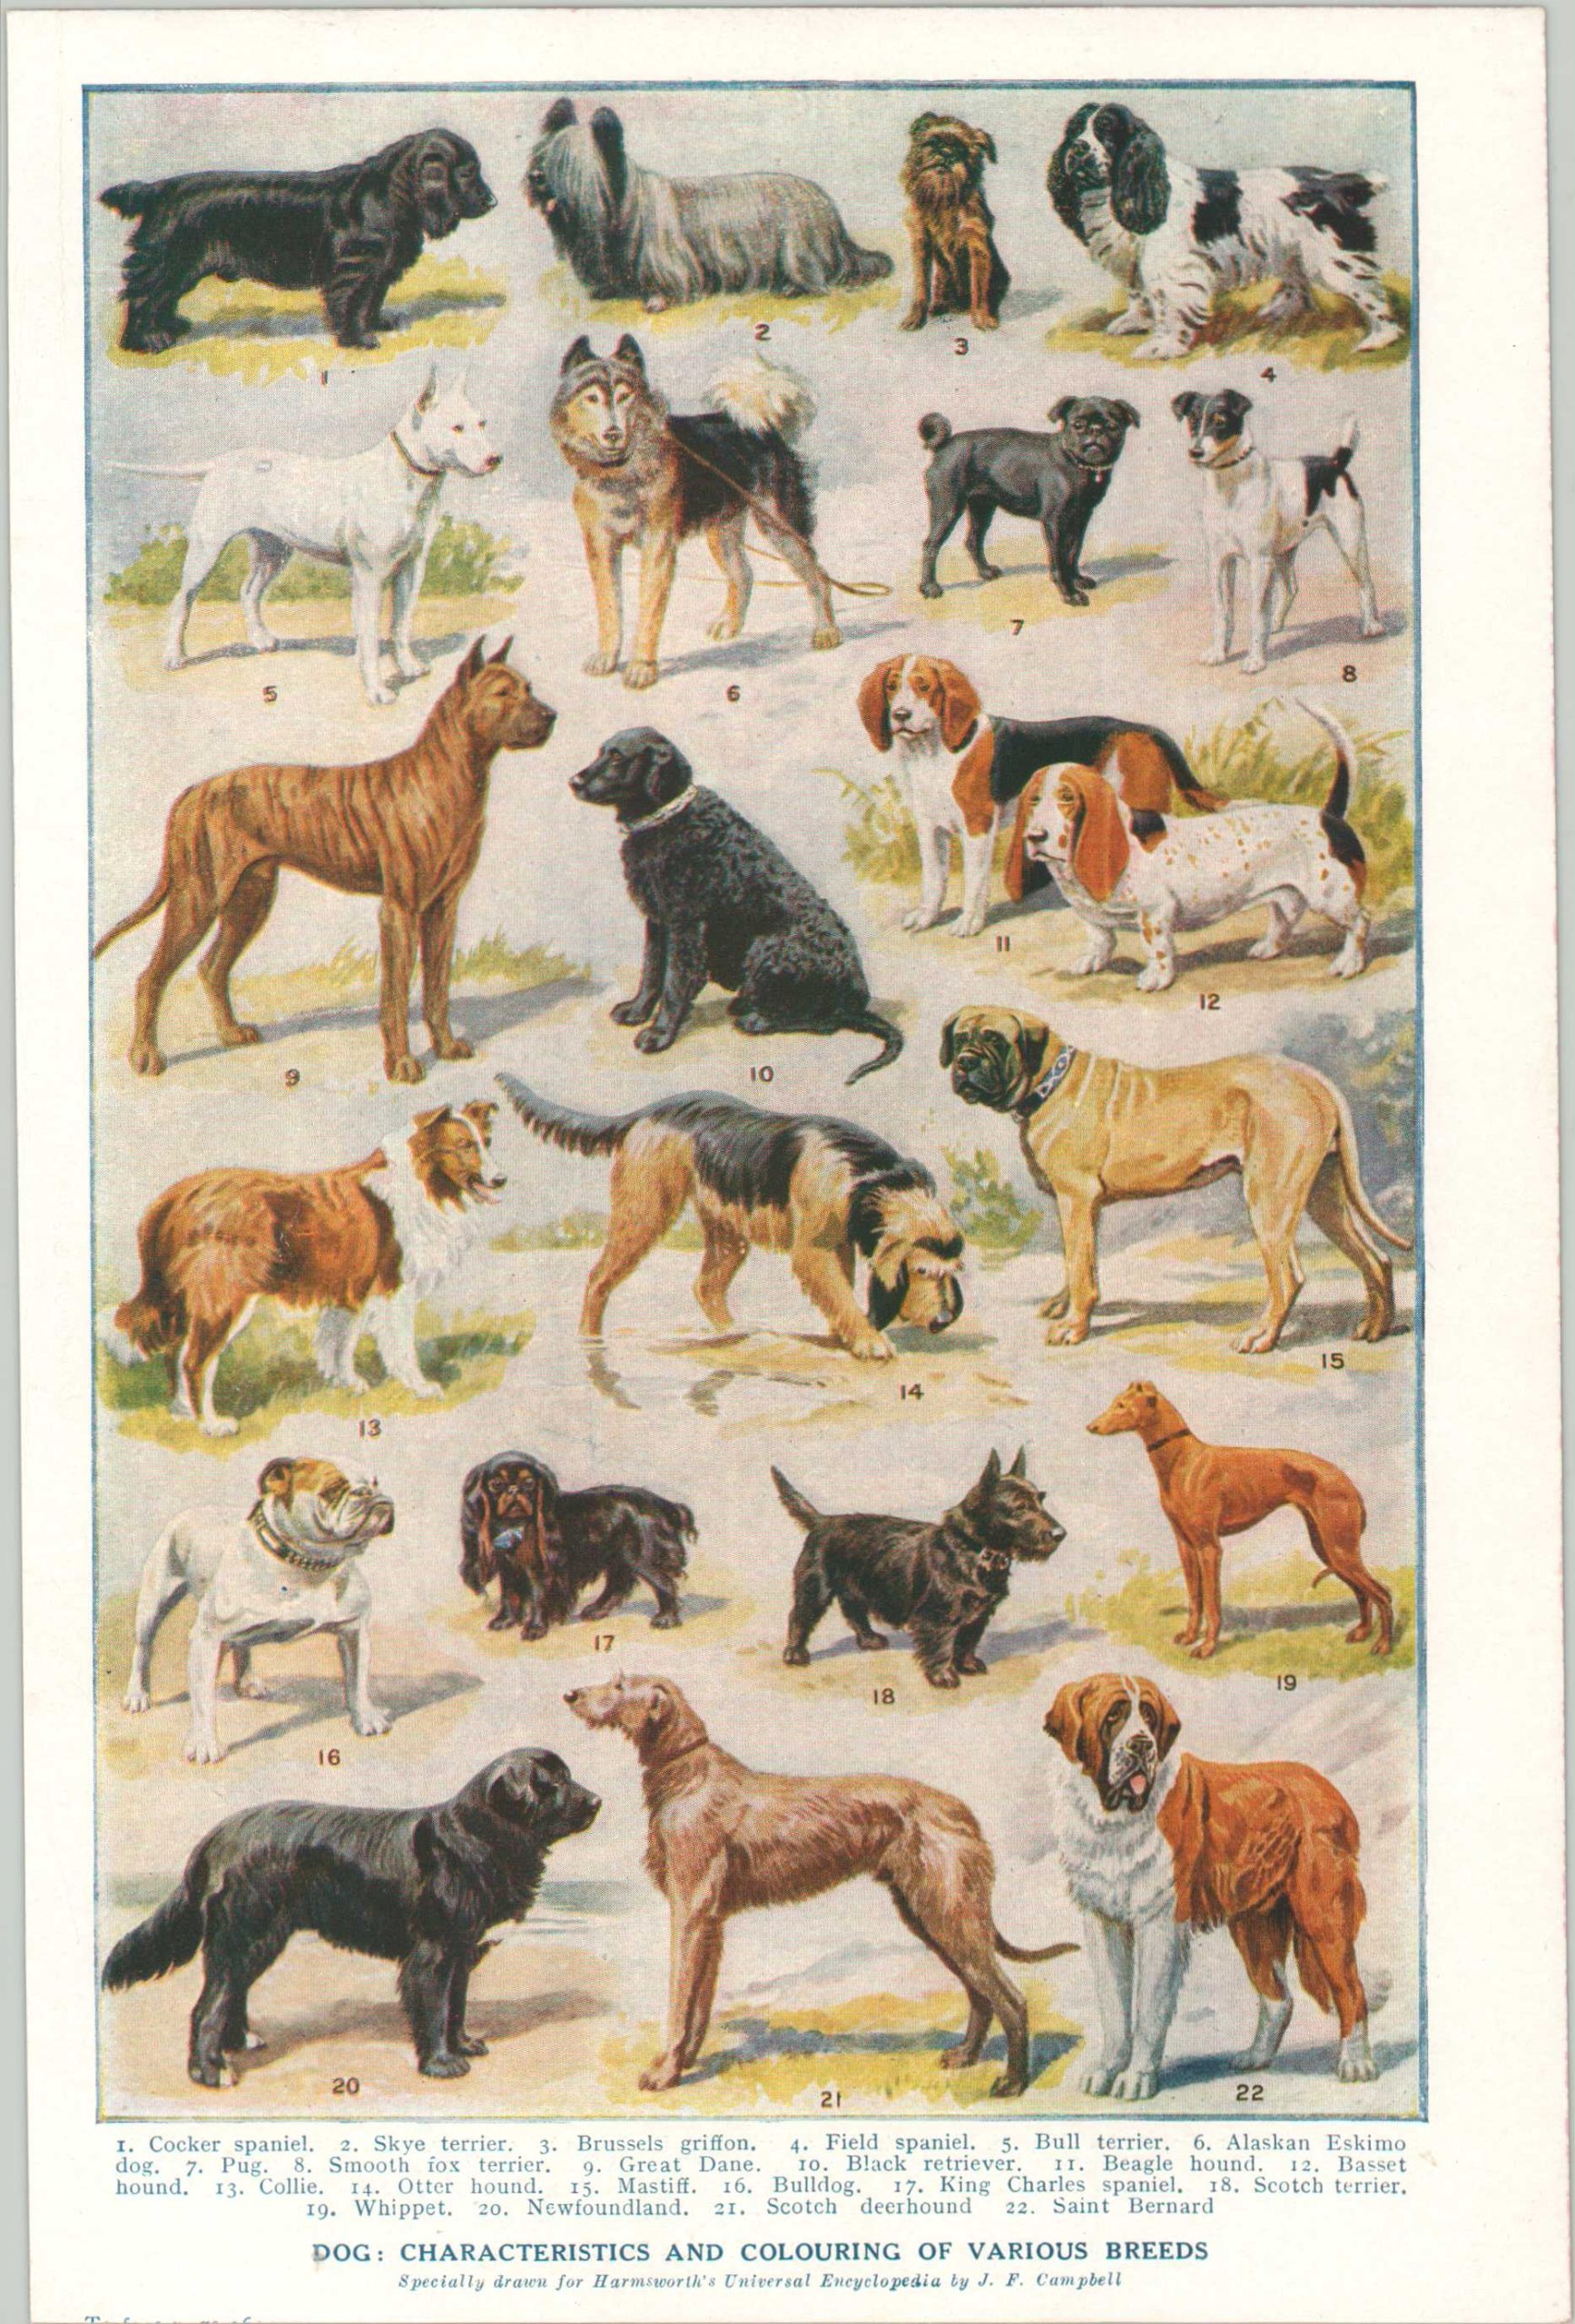 Dog: Characteristics and Colouring of Various Breeds | Curtis Wright Maps